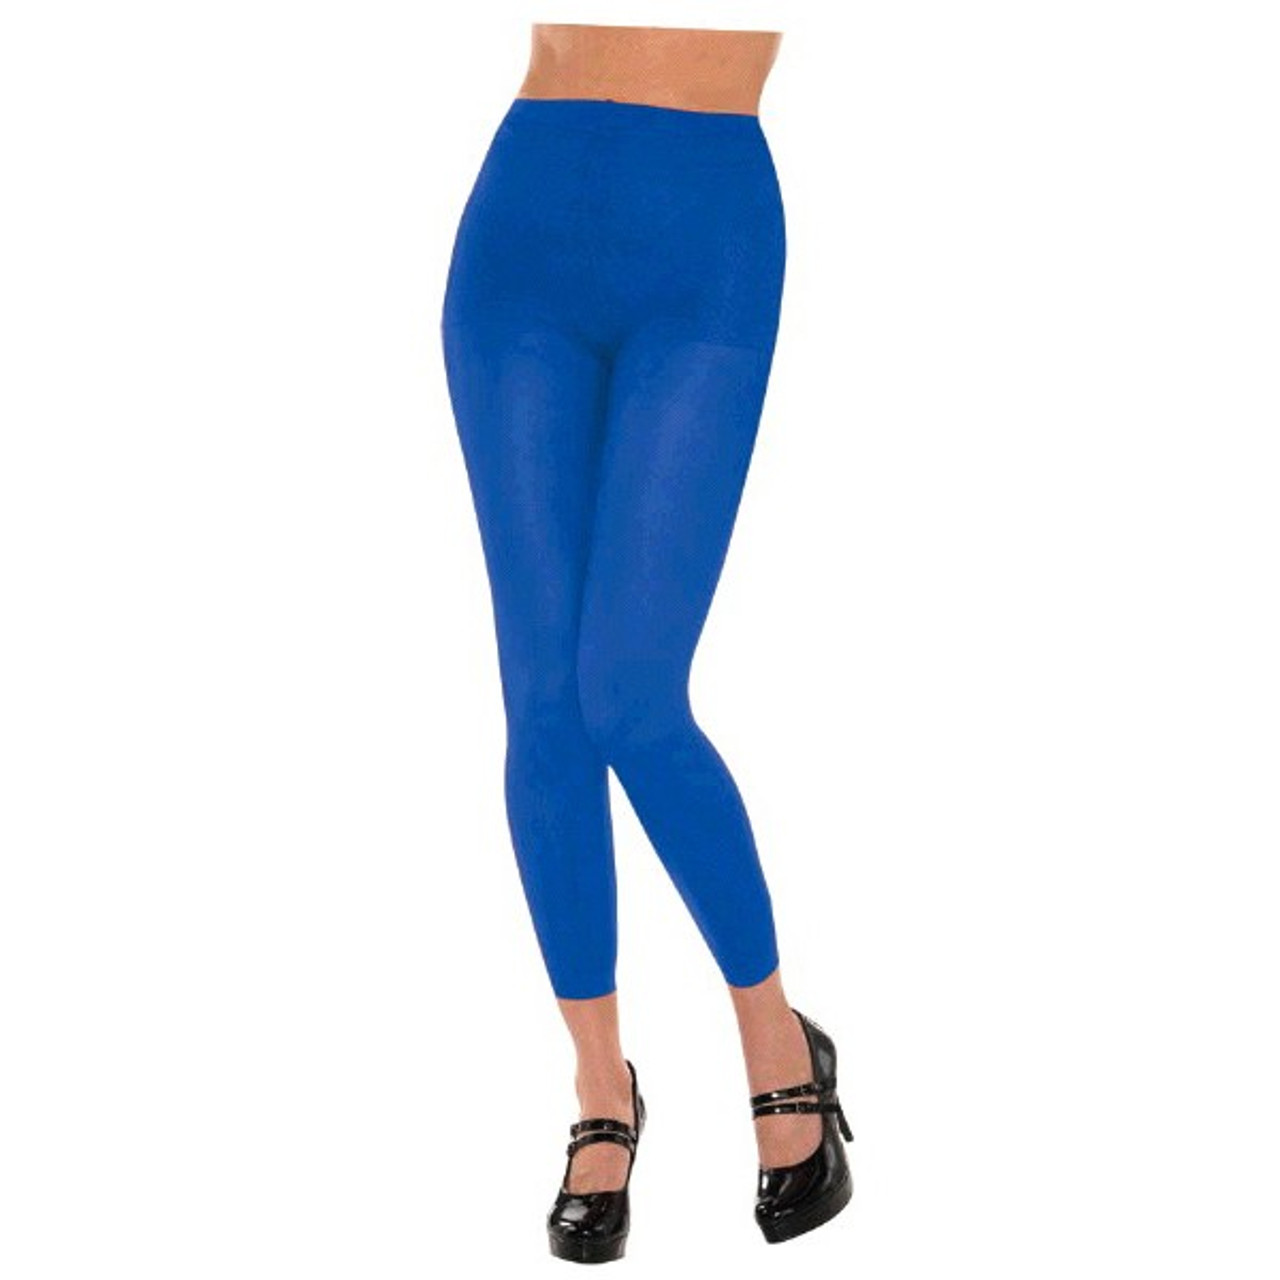 Light Blue Footless Spirit Tights - Party Time, Inc.